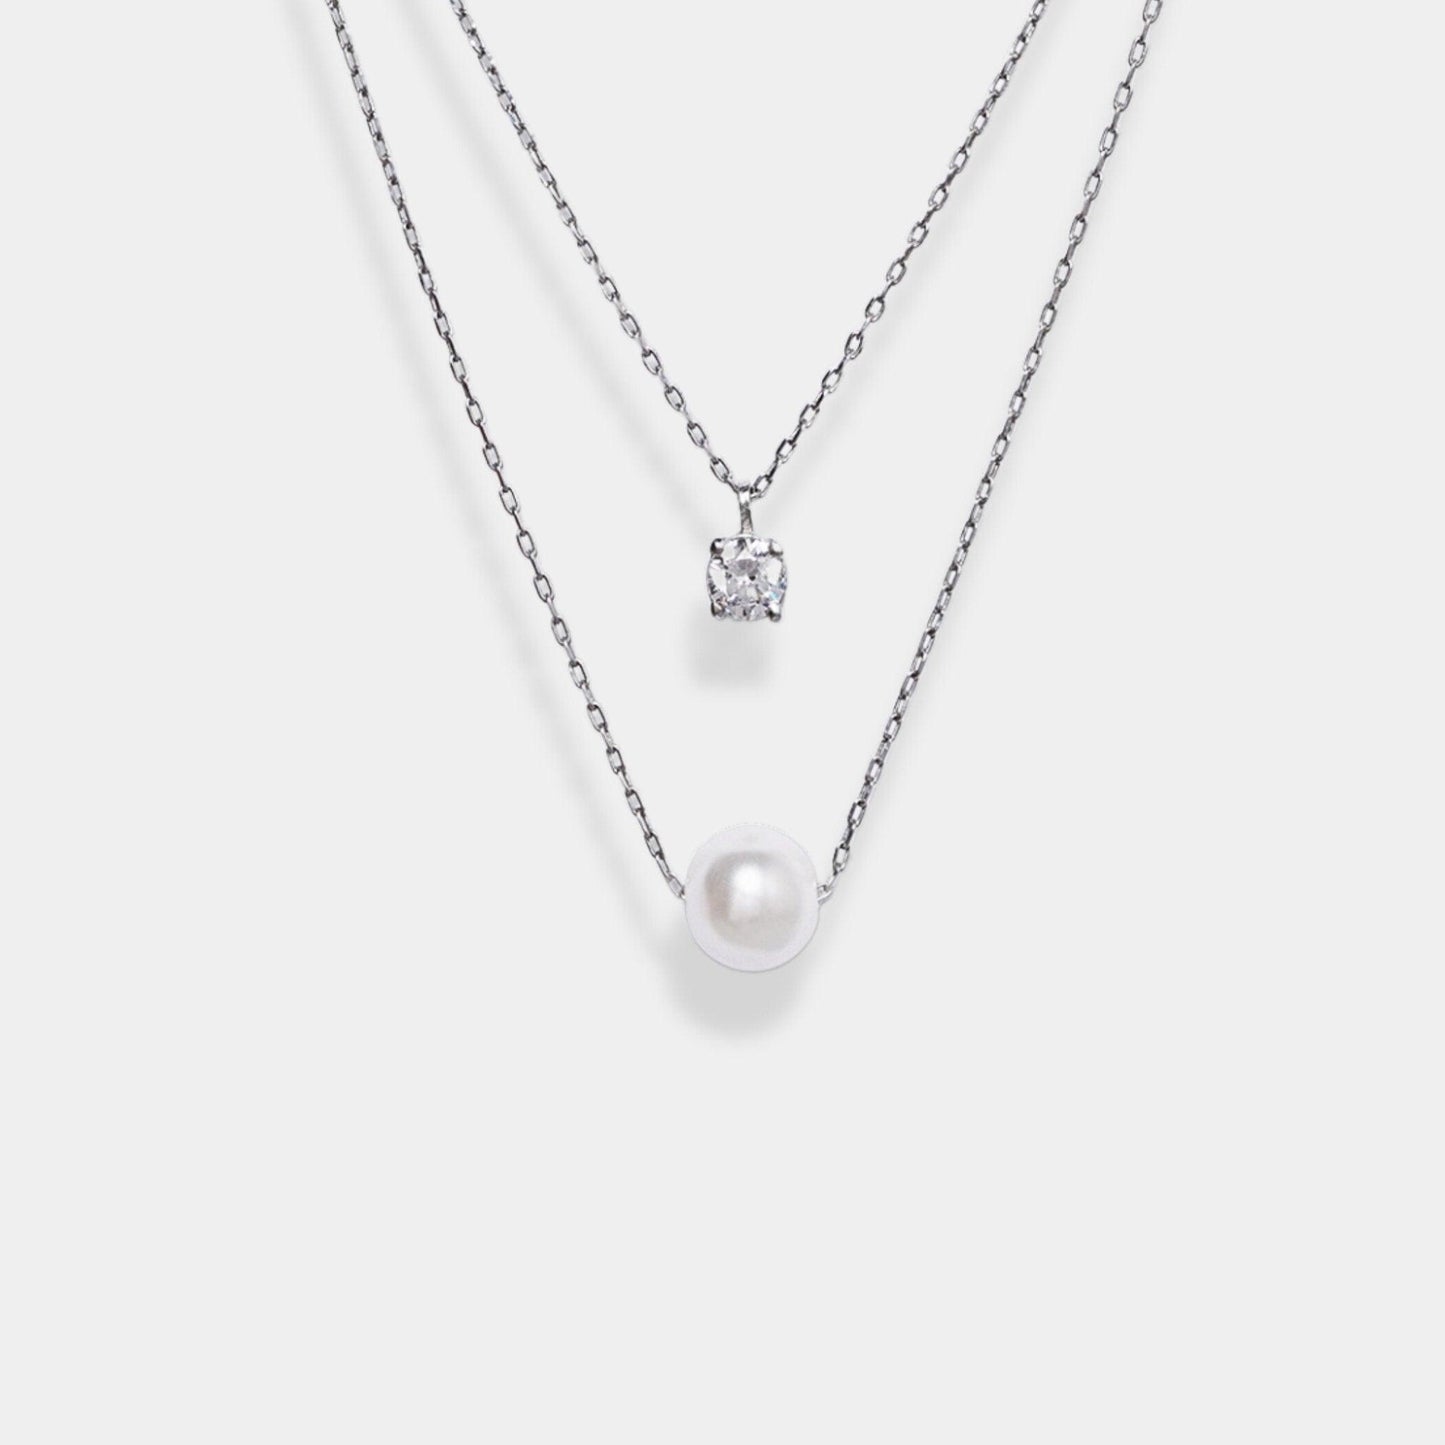 Elevate your style with our exquisite sterling silver necklace featuring a captivating circle pendant on a beautifully layered delicate chain